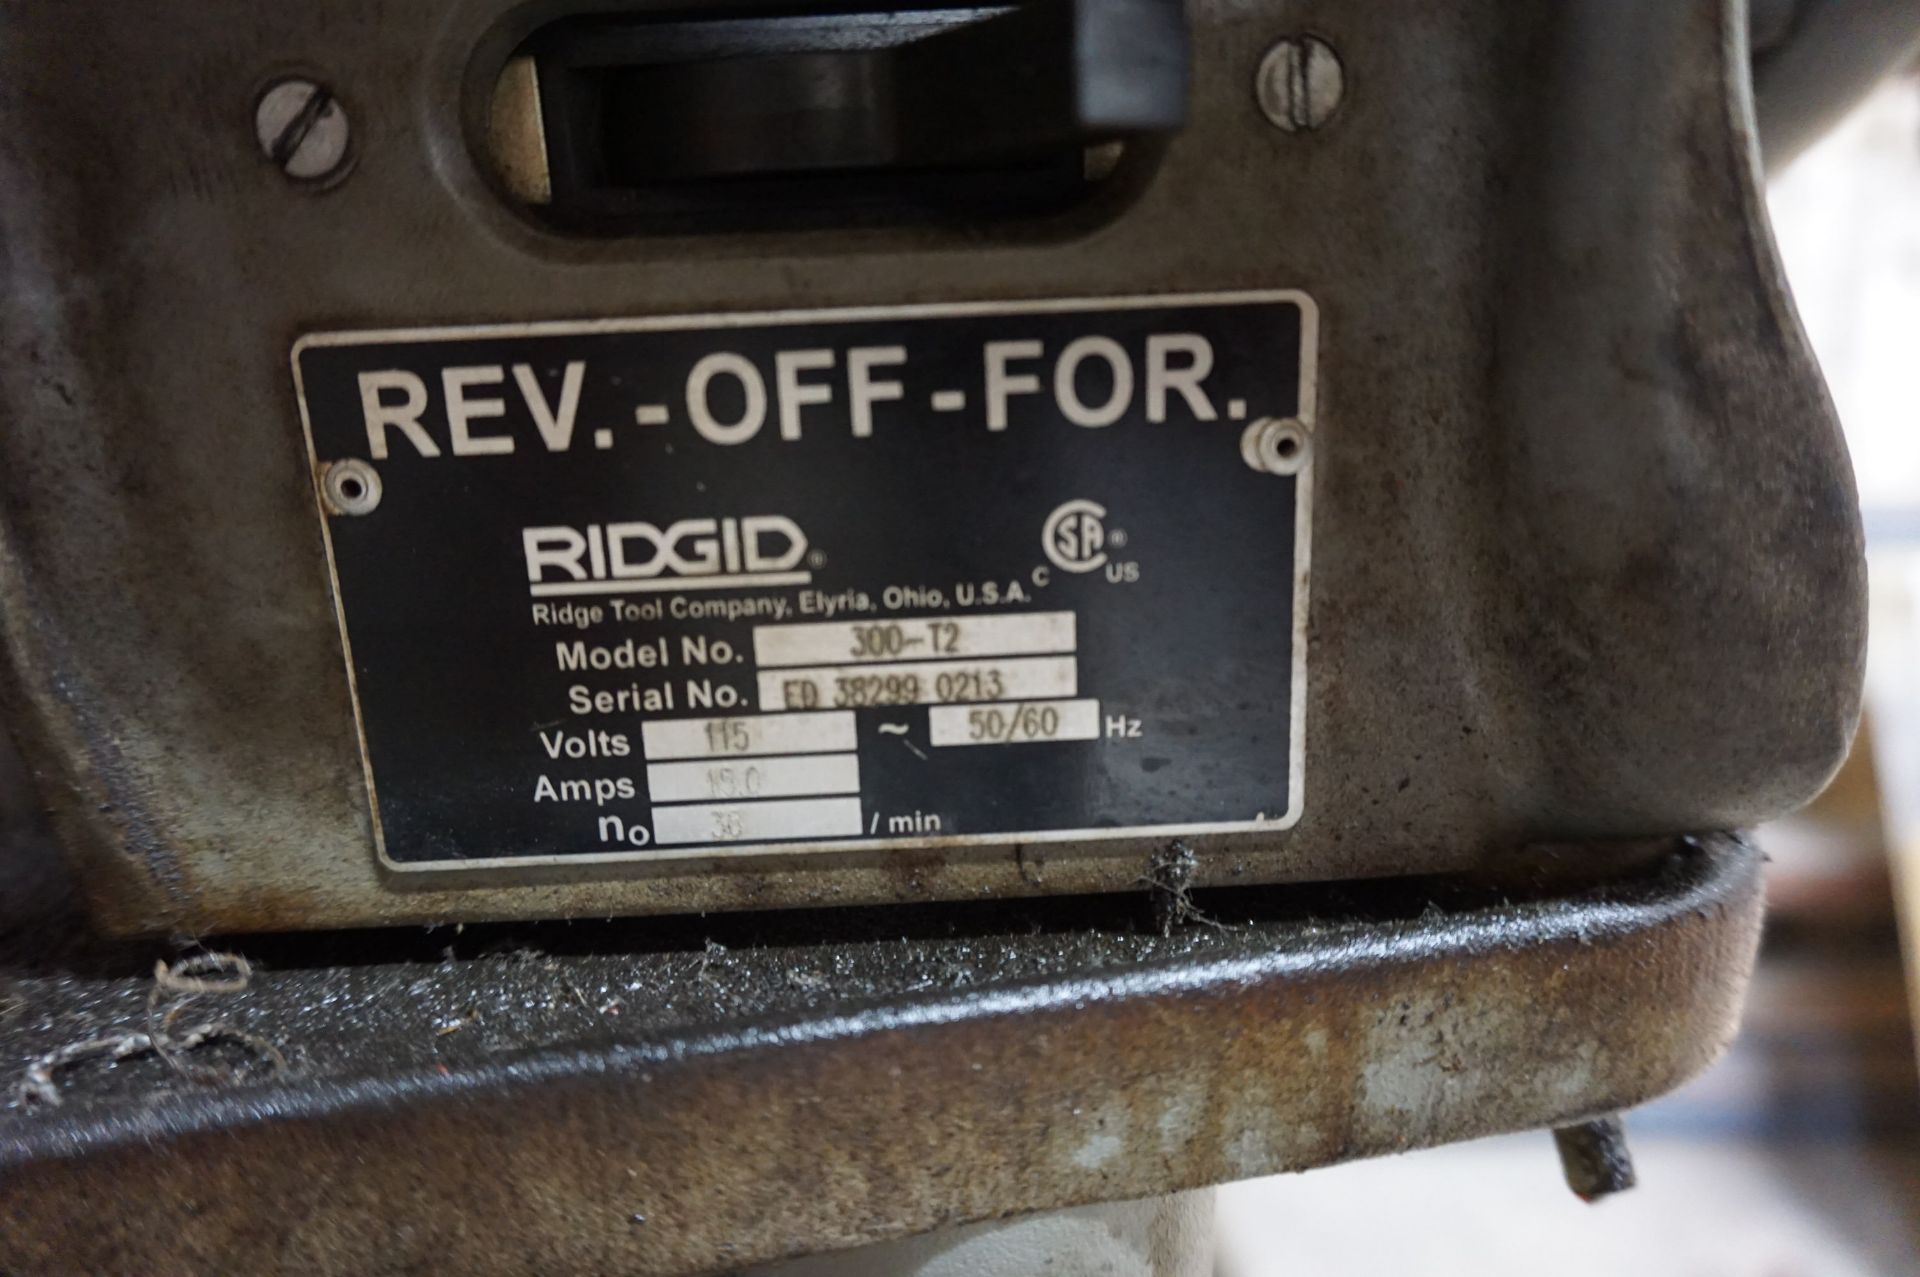 LOT TO INCLUDE: (1) RIDGID POWER DRIVE SYSTEM 300, MODEL 300-T2, S/N ED382990213, WITH STAND AND - Image 5 of 5